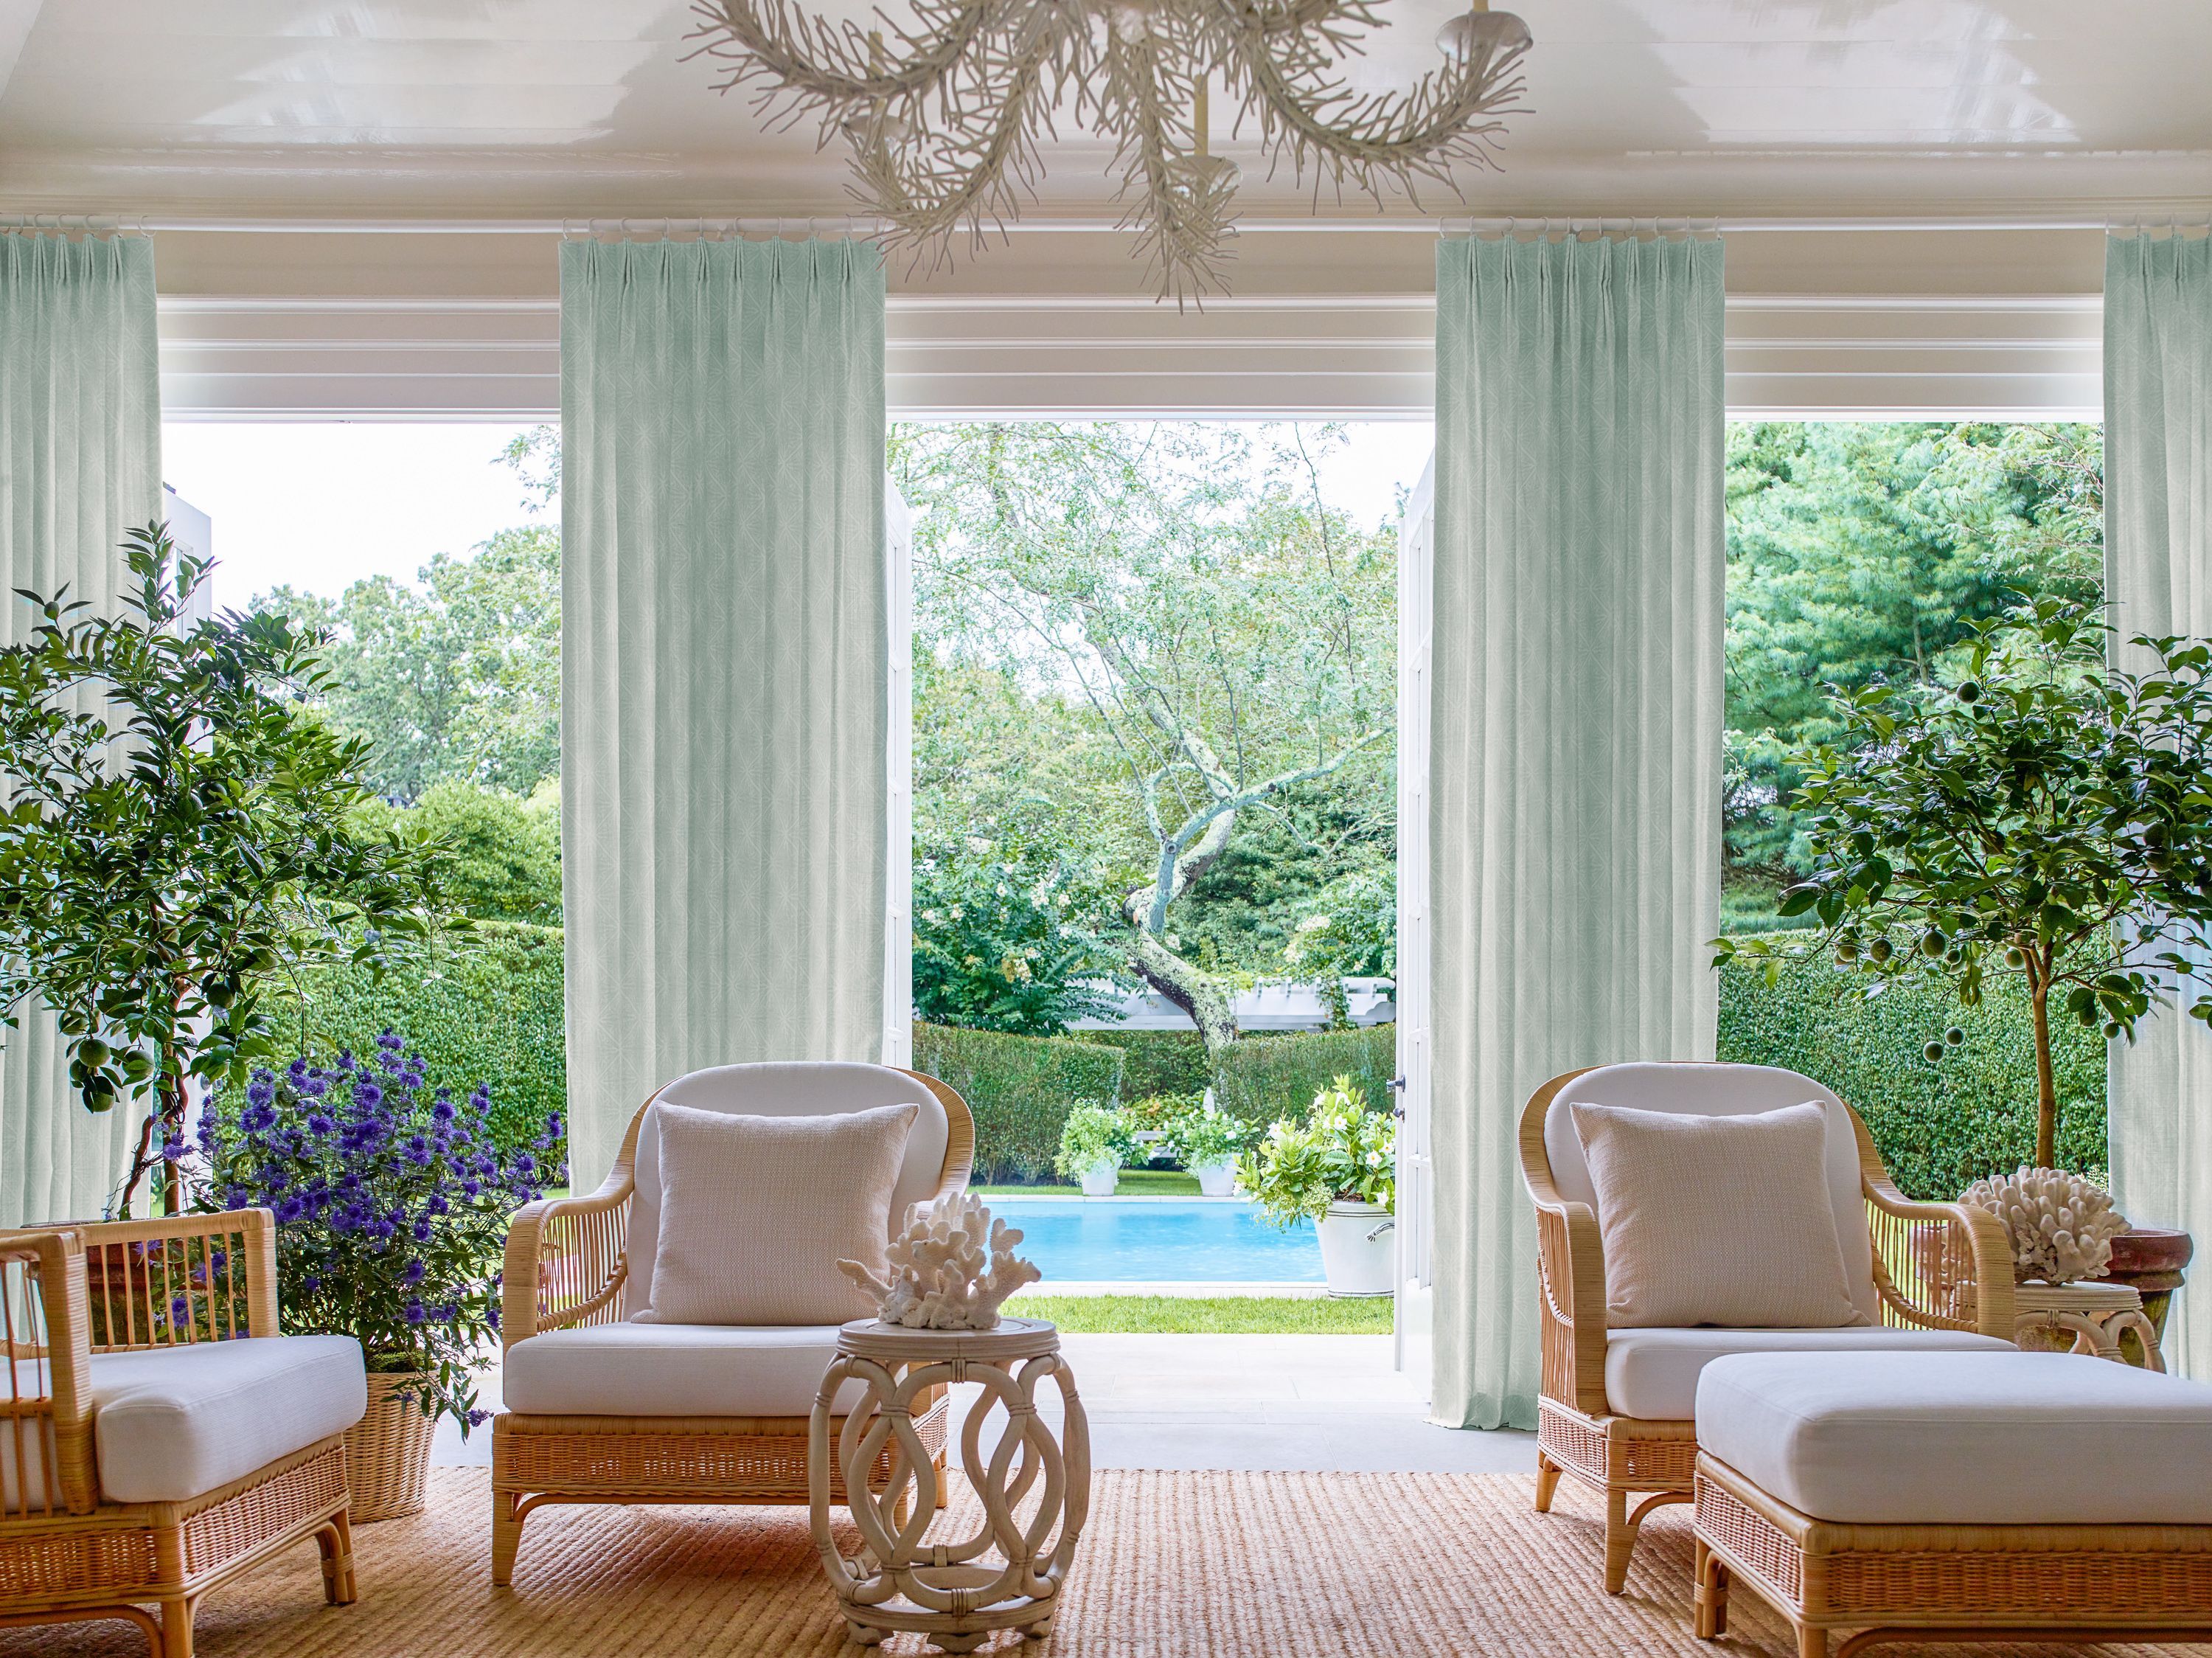 16 Types of Window Treatments - How to Pick a Window Treatment Guide